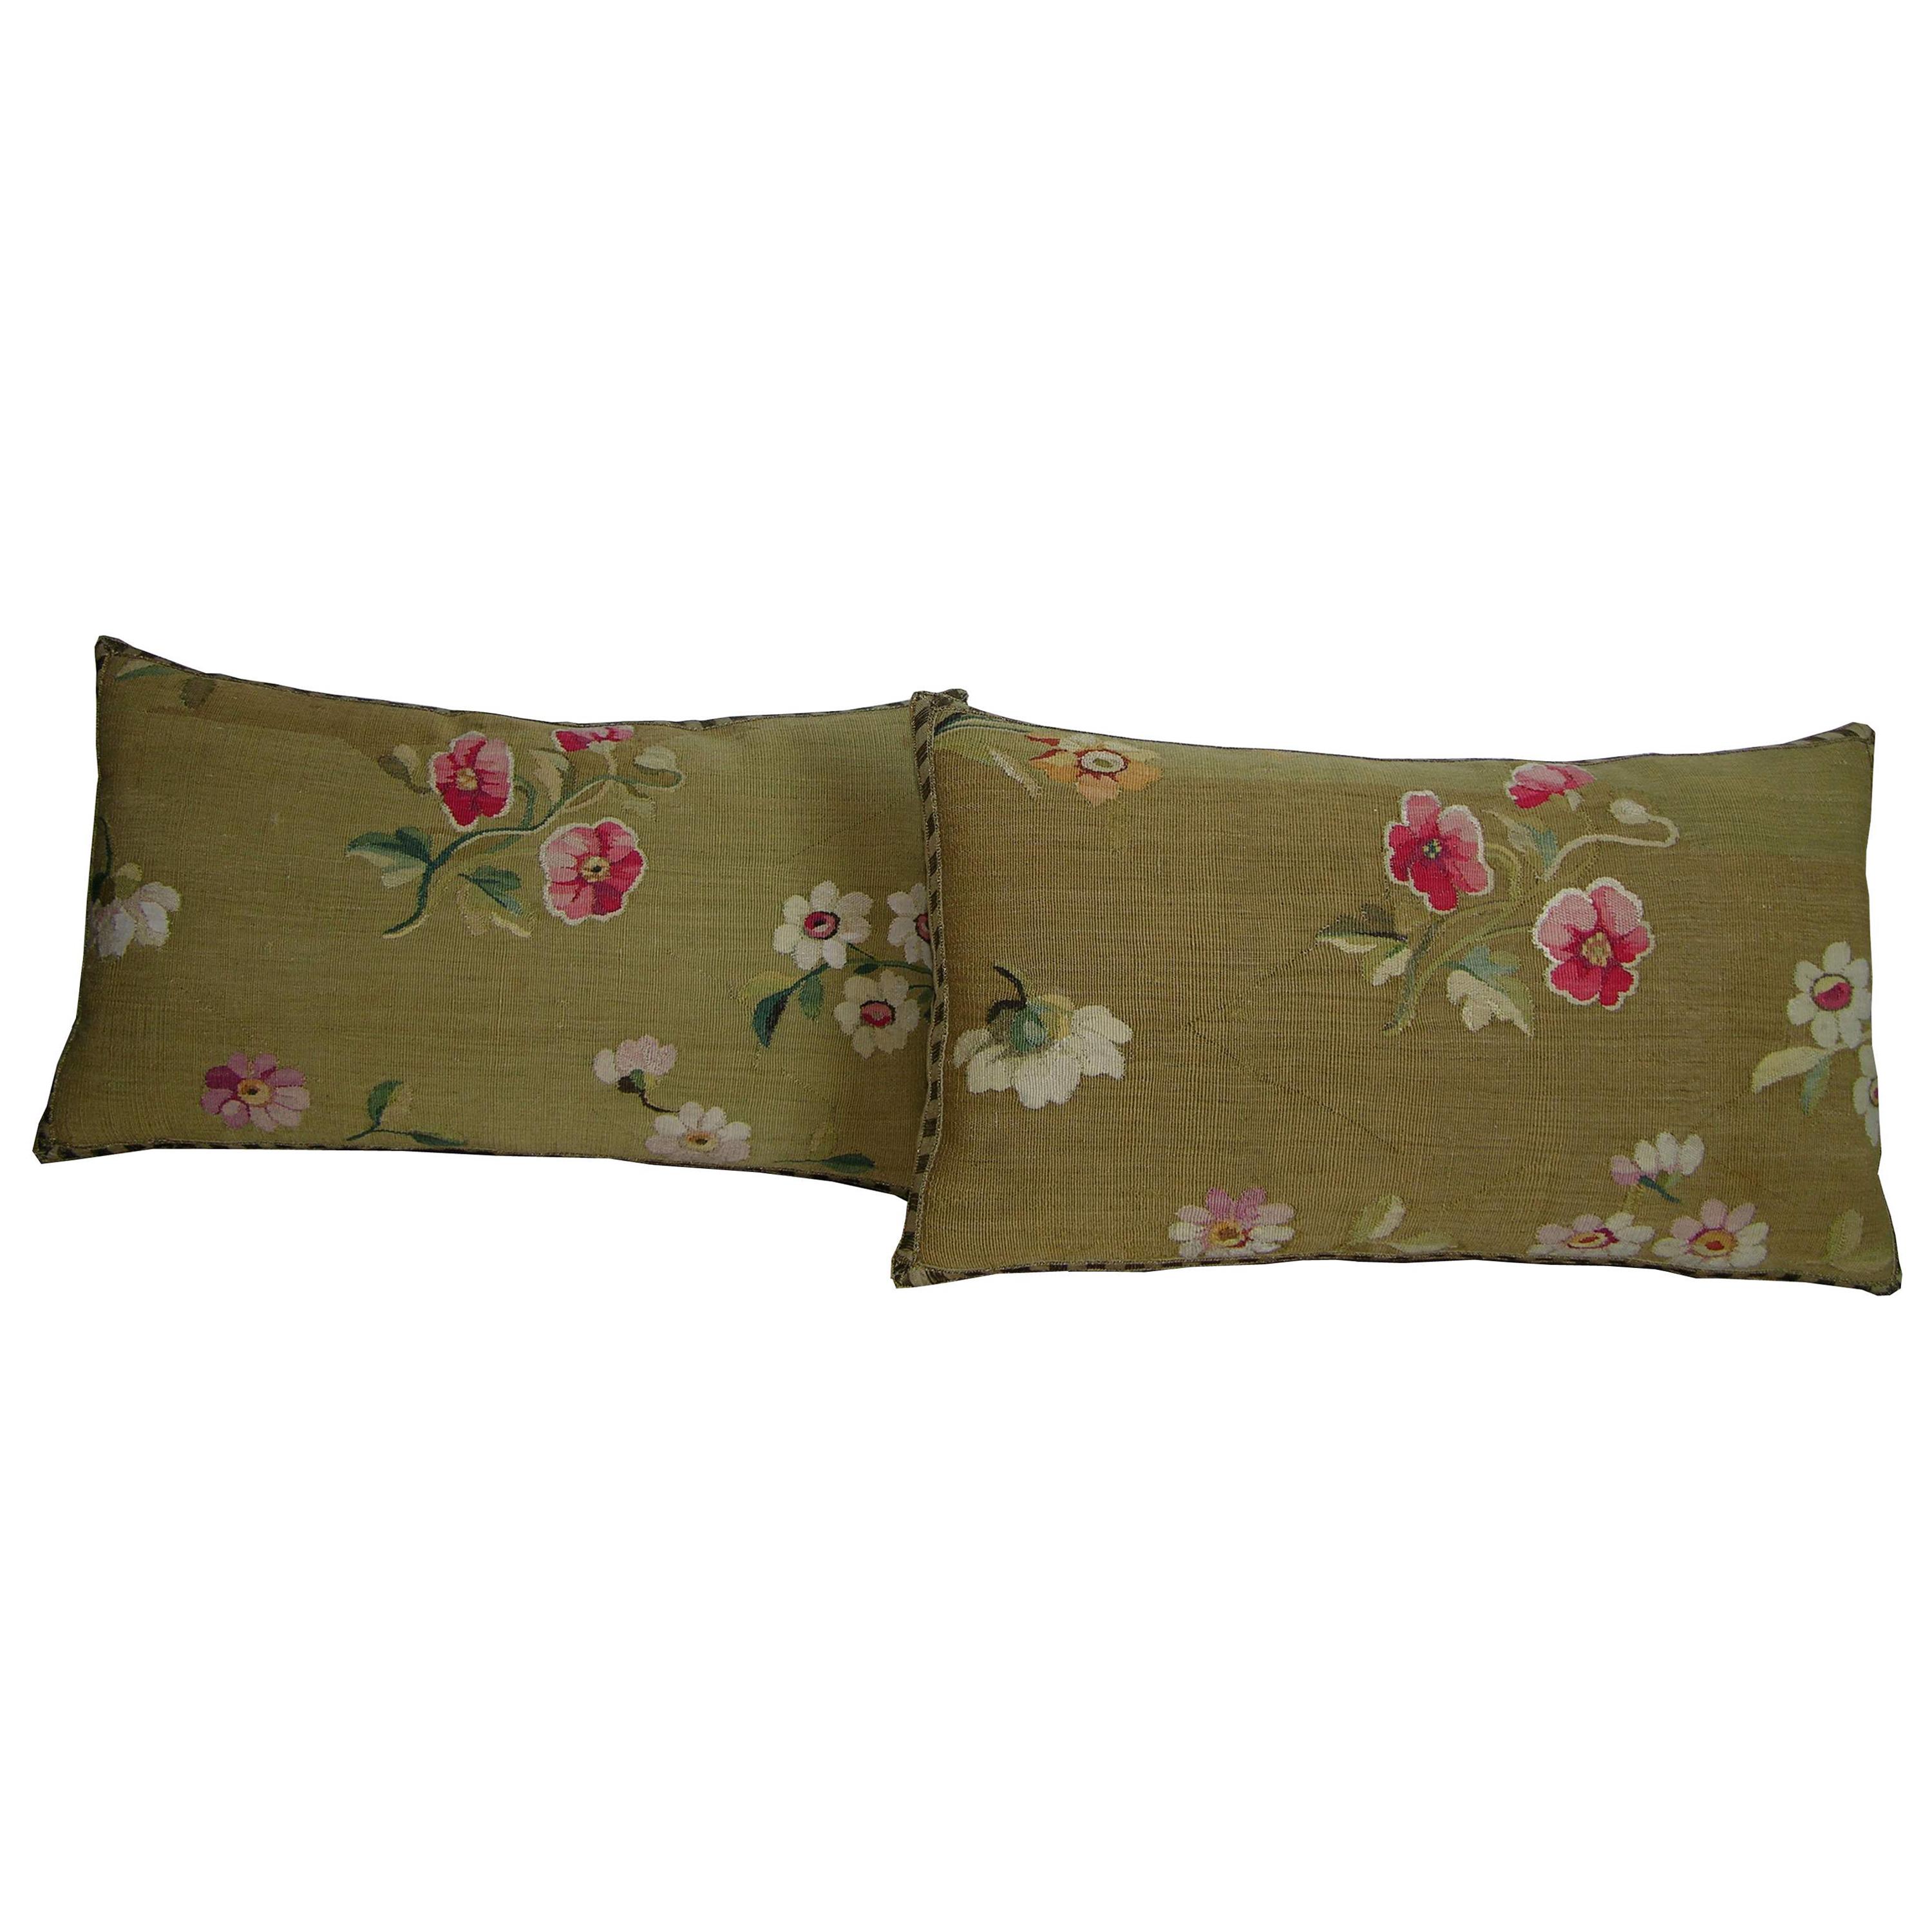 Antique French Aubusson Tapestry Pillow, circa 1860 1749p 1750p